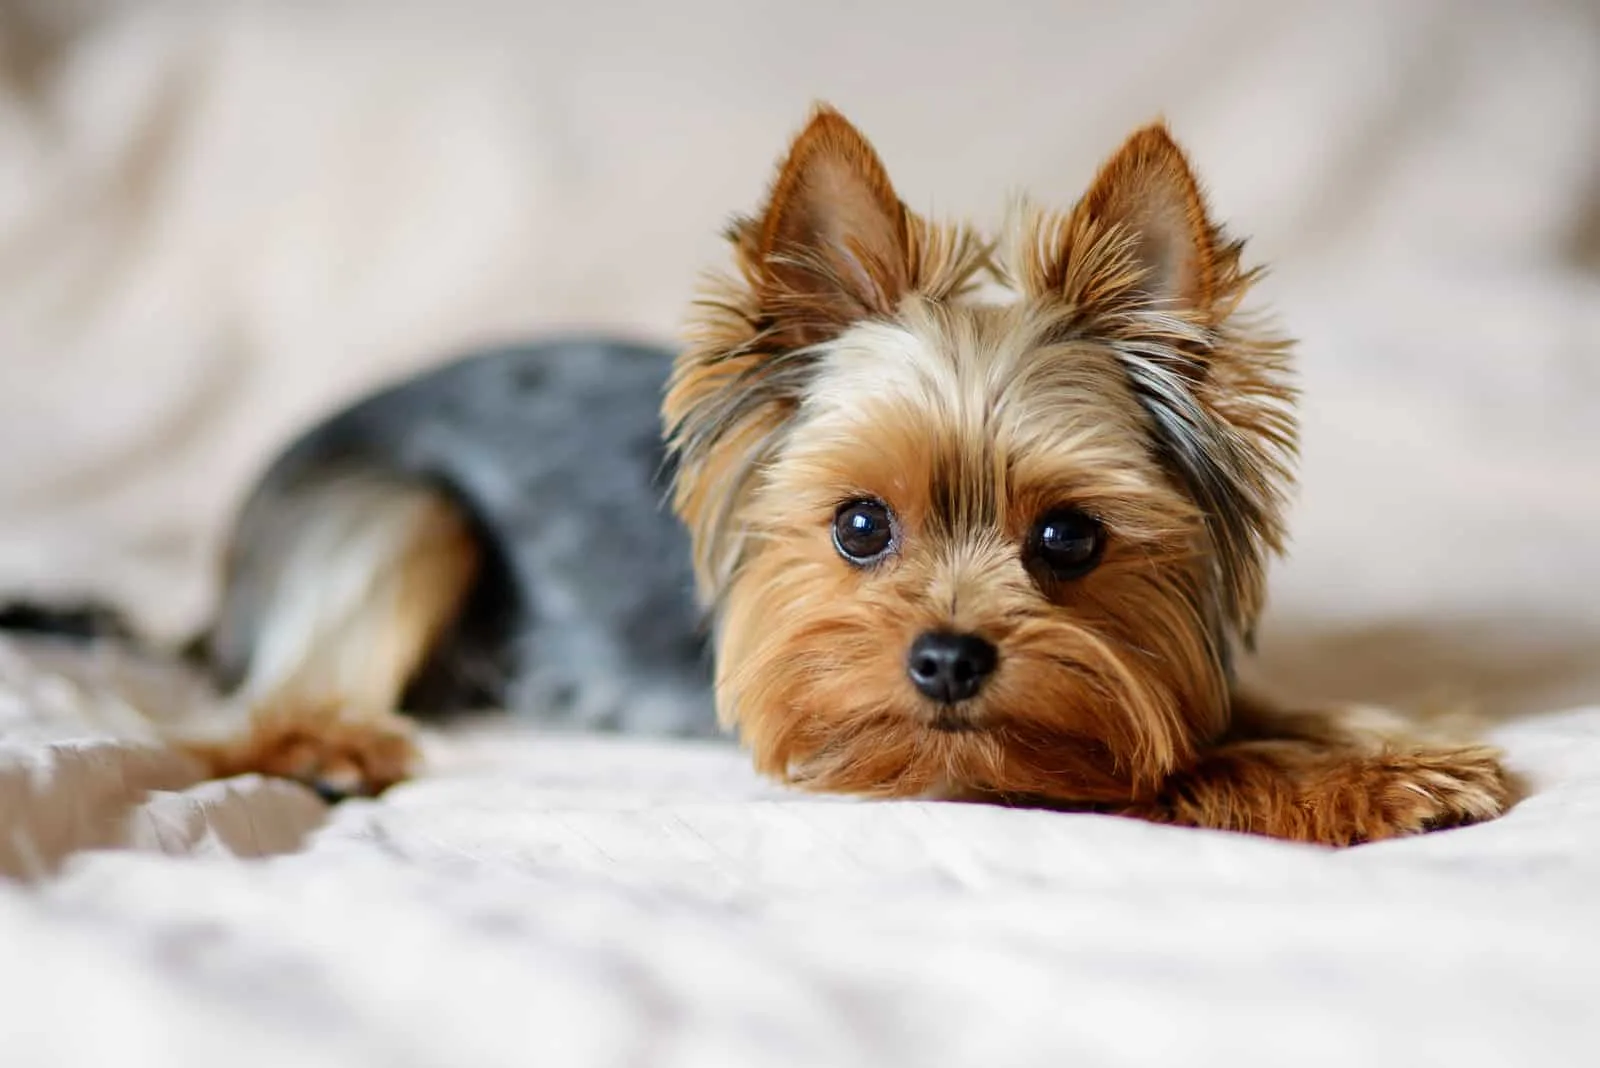 The Yorkshire Terrier is lying on the bed